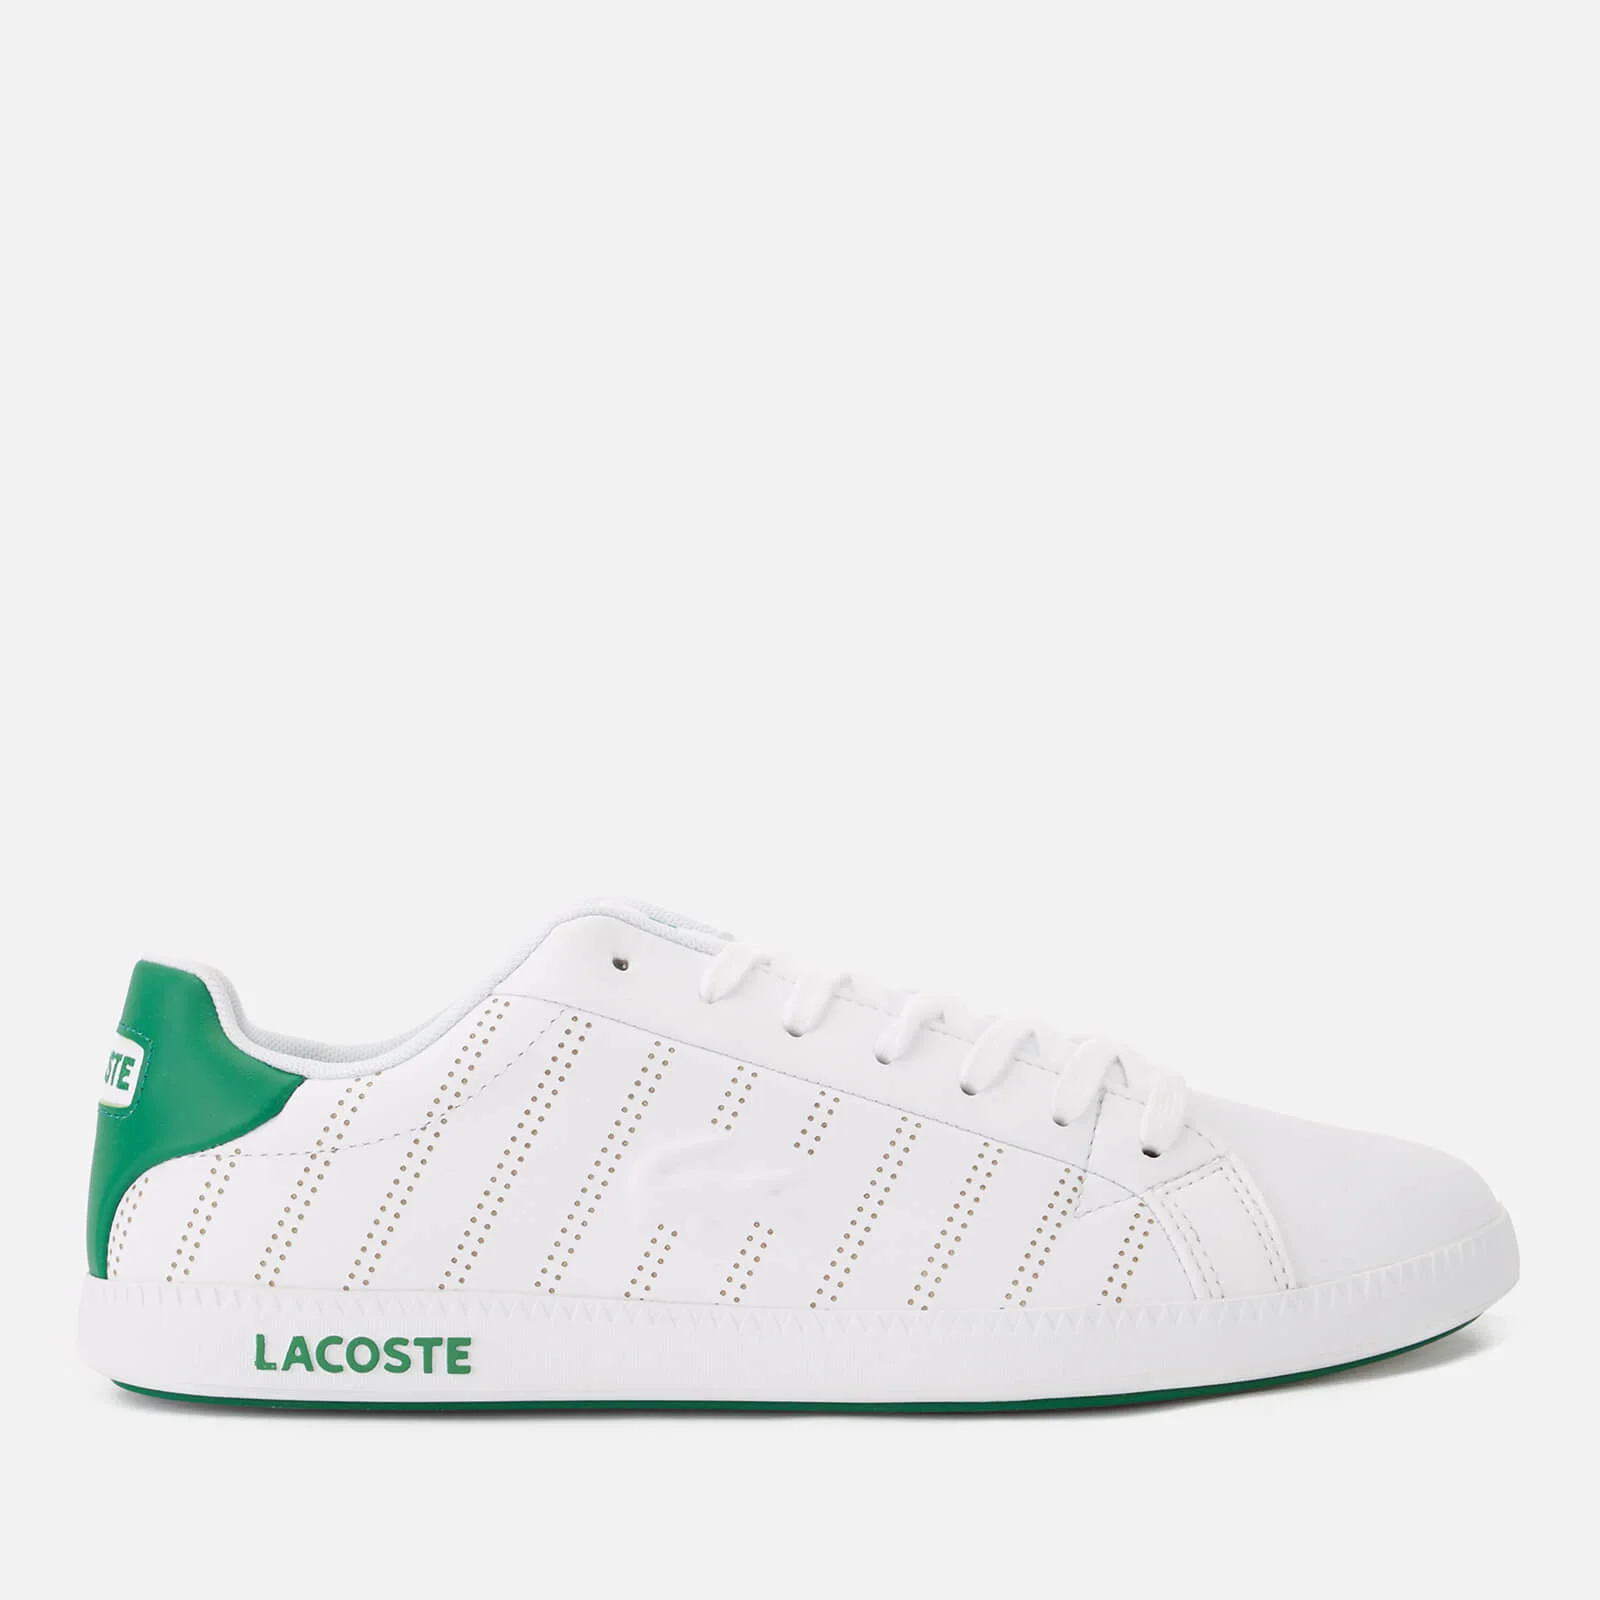 Lacoste Men's Graduate 318 1 Perforated Leather Trainers - White/Green Image 1